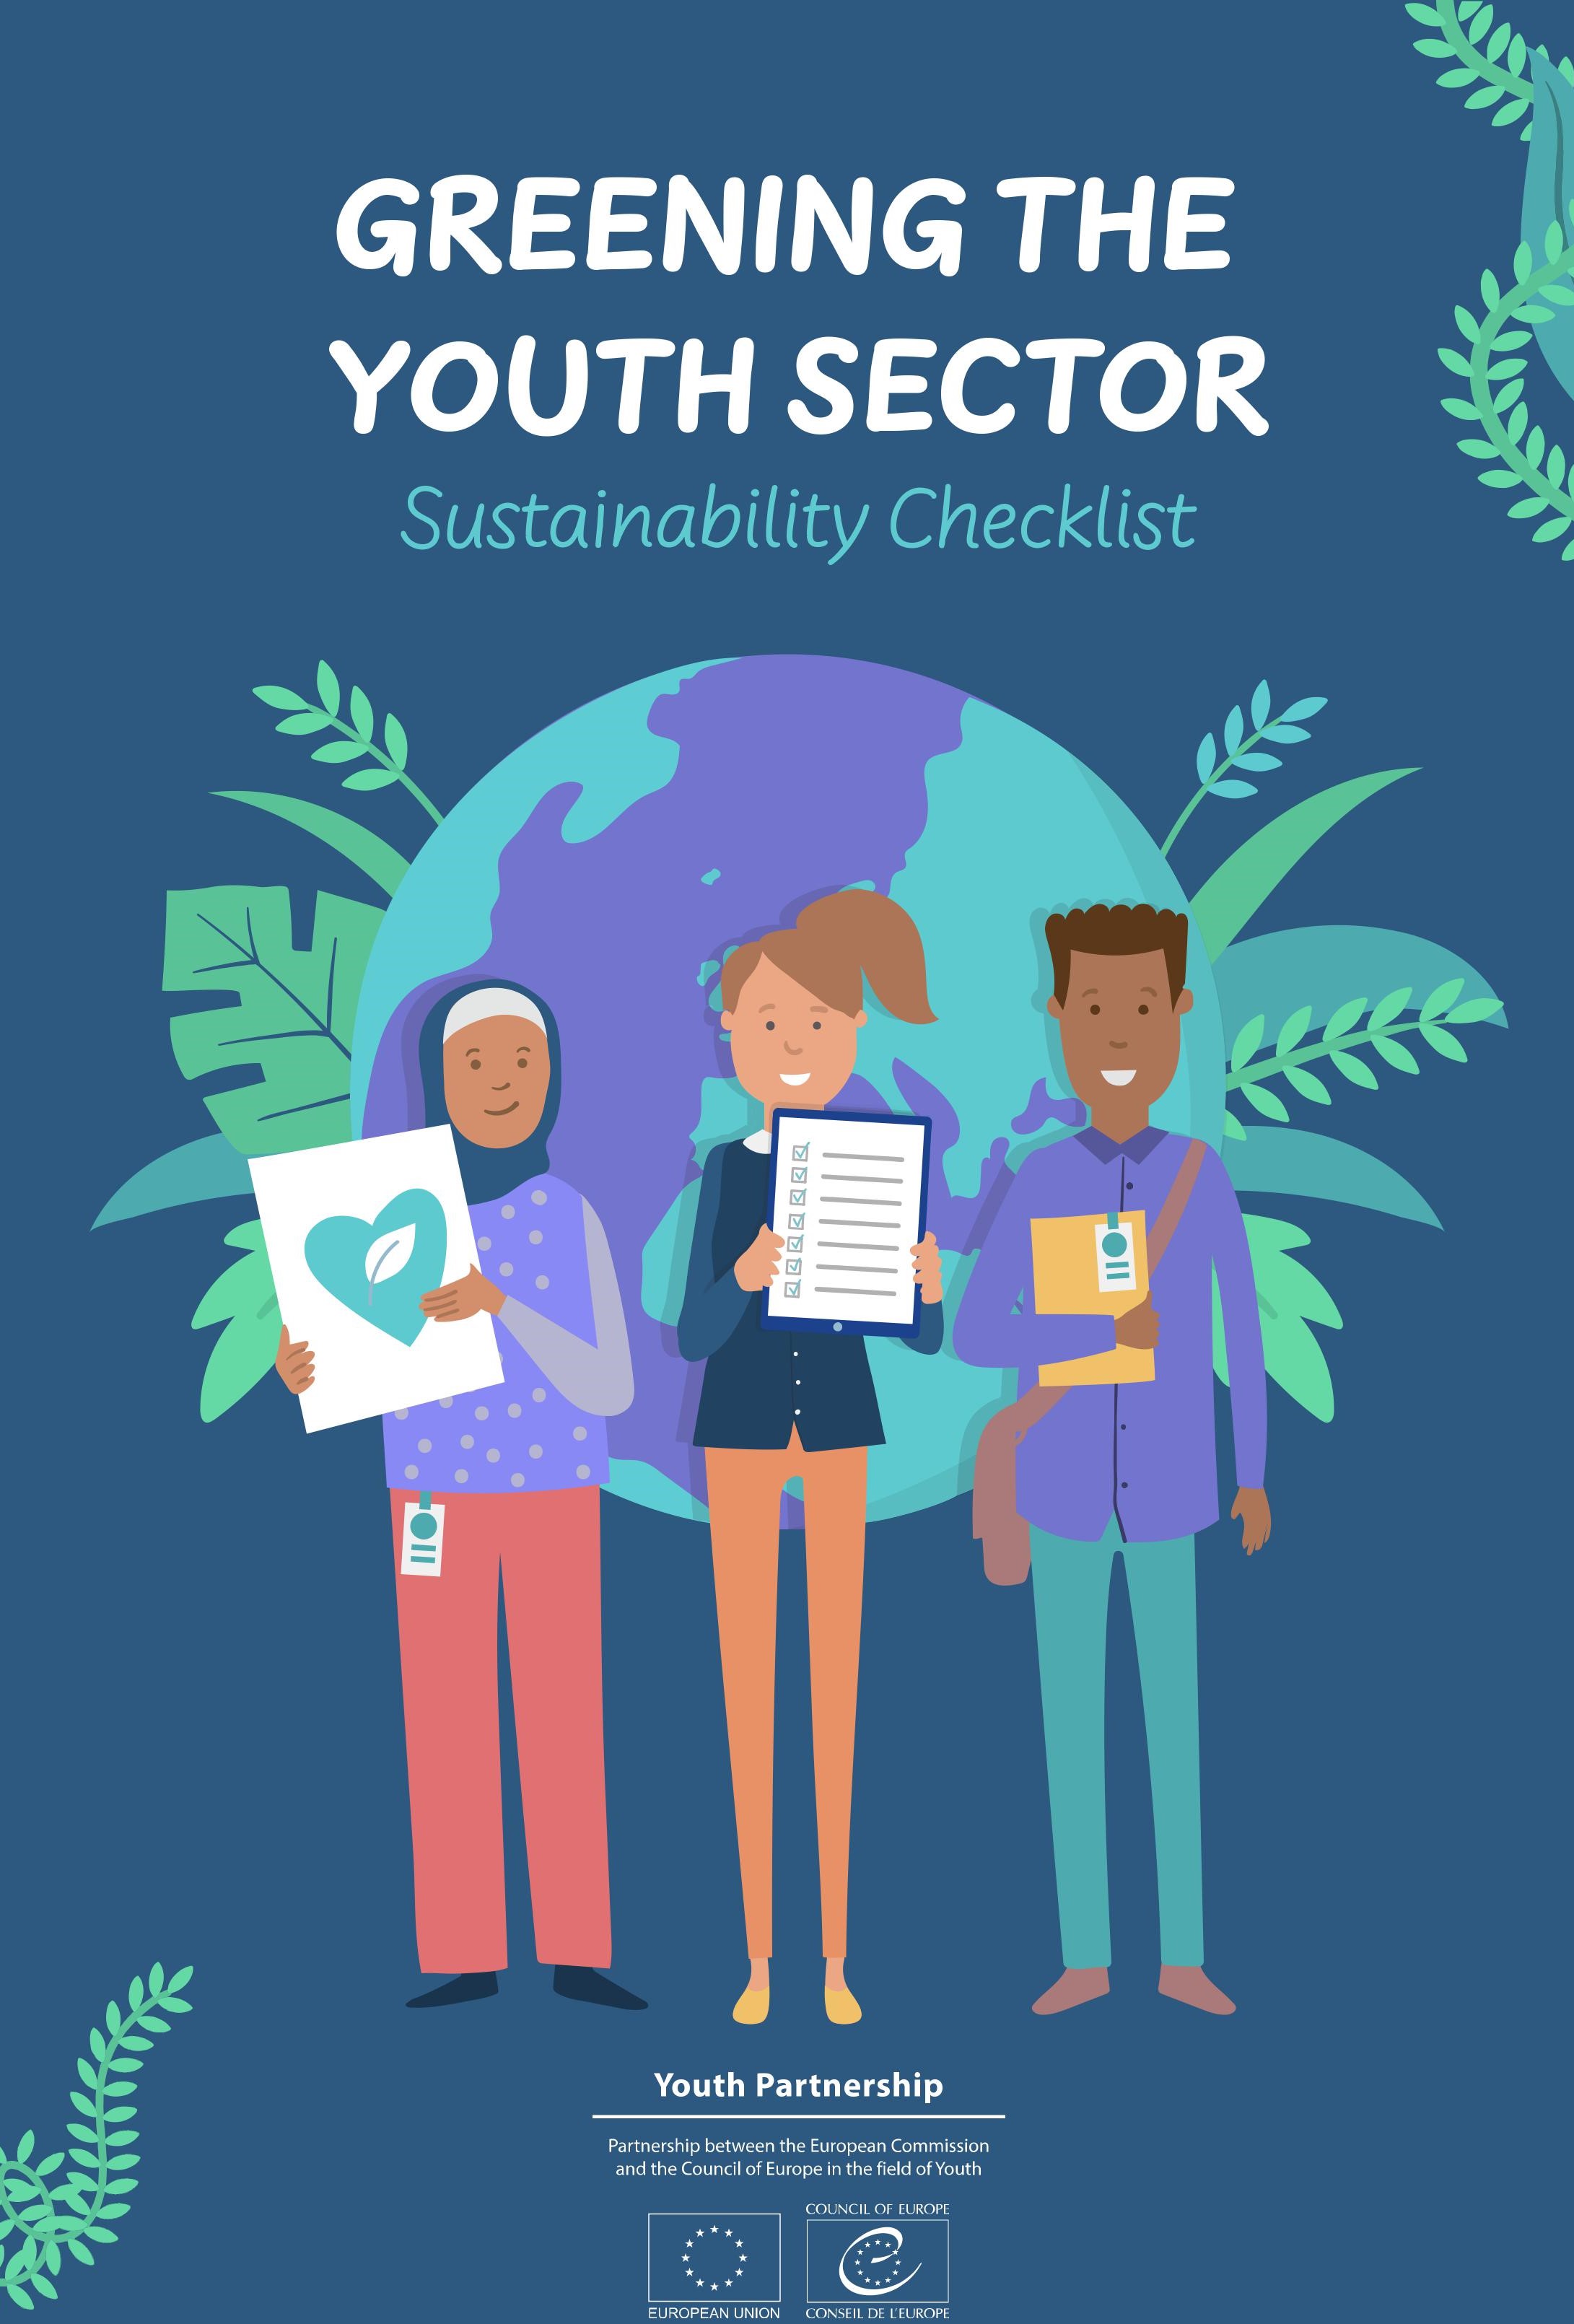 Greening the youth sector - Sustainability Checklist Published